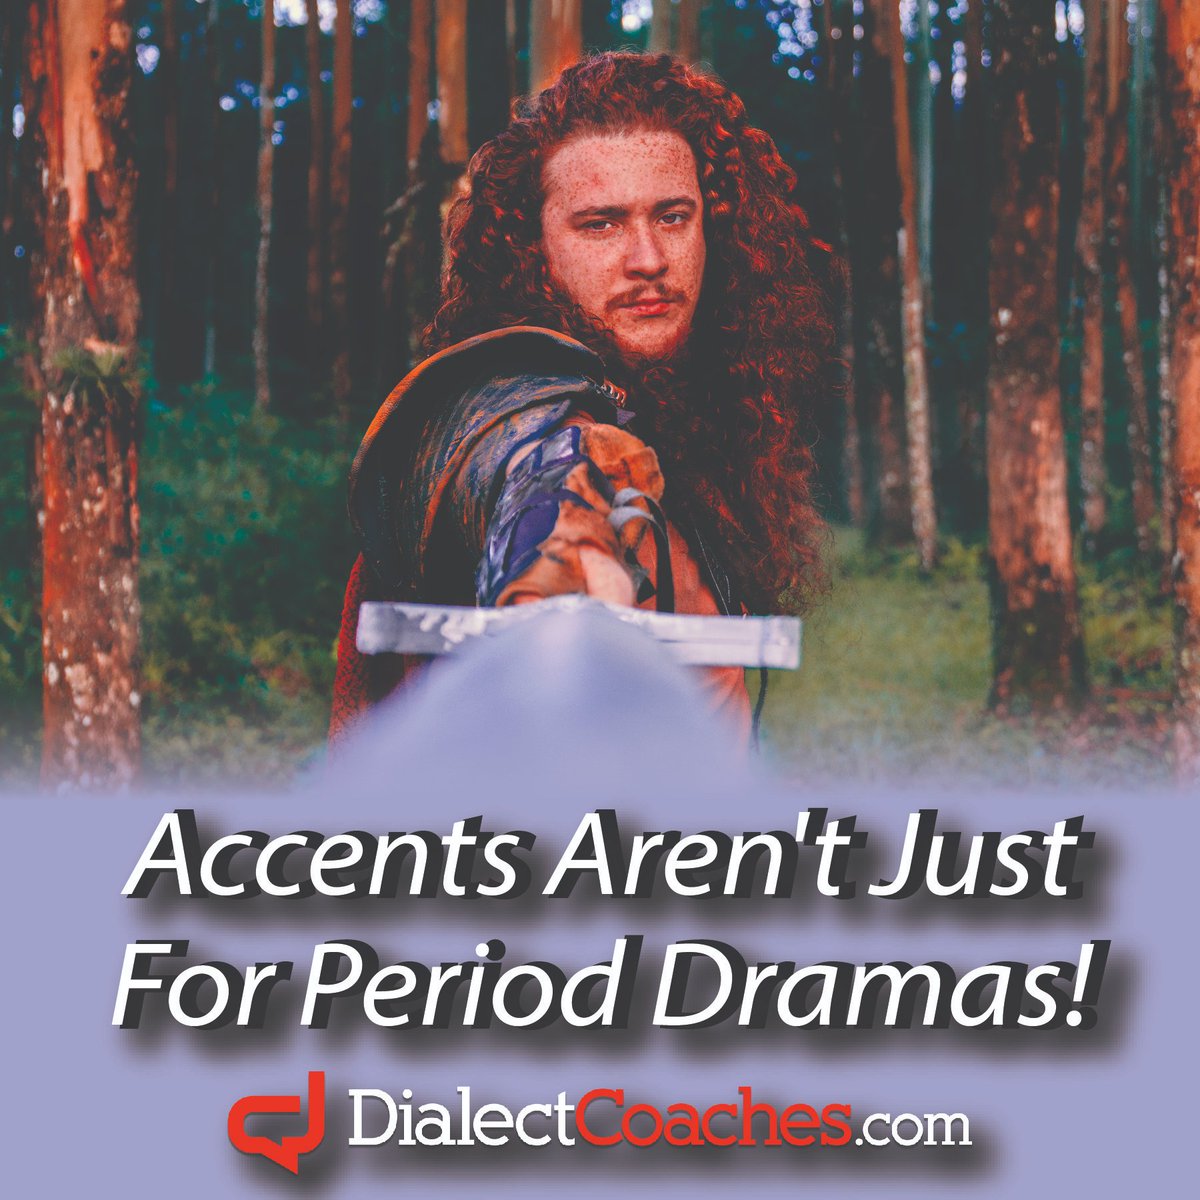 They can add depth and complexity to modern characters as well. Keep exploring new accents and expanding your range.

#actingcoach #characterdevelopment #acting #actorlife #actorslife #actorslife🎬 #actor #actors #accents #accentcoach #dialectcoach